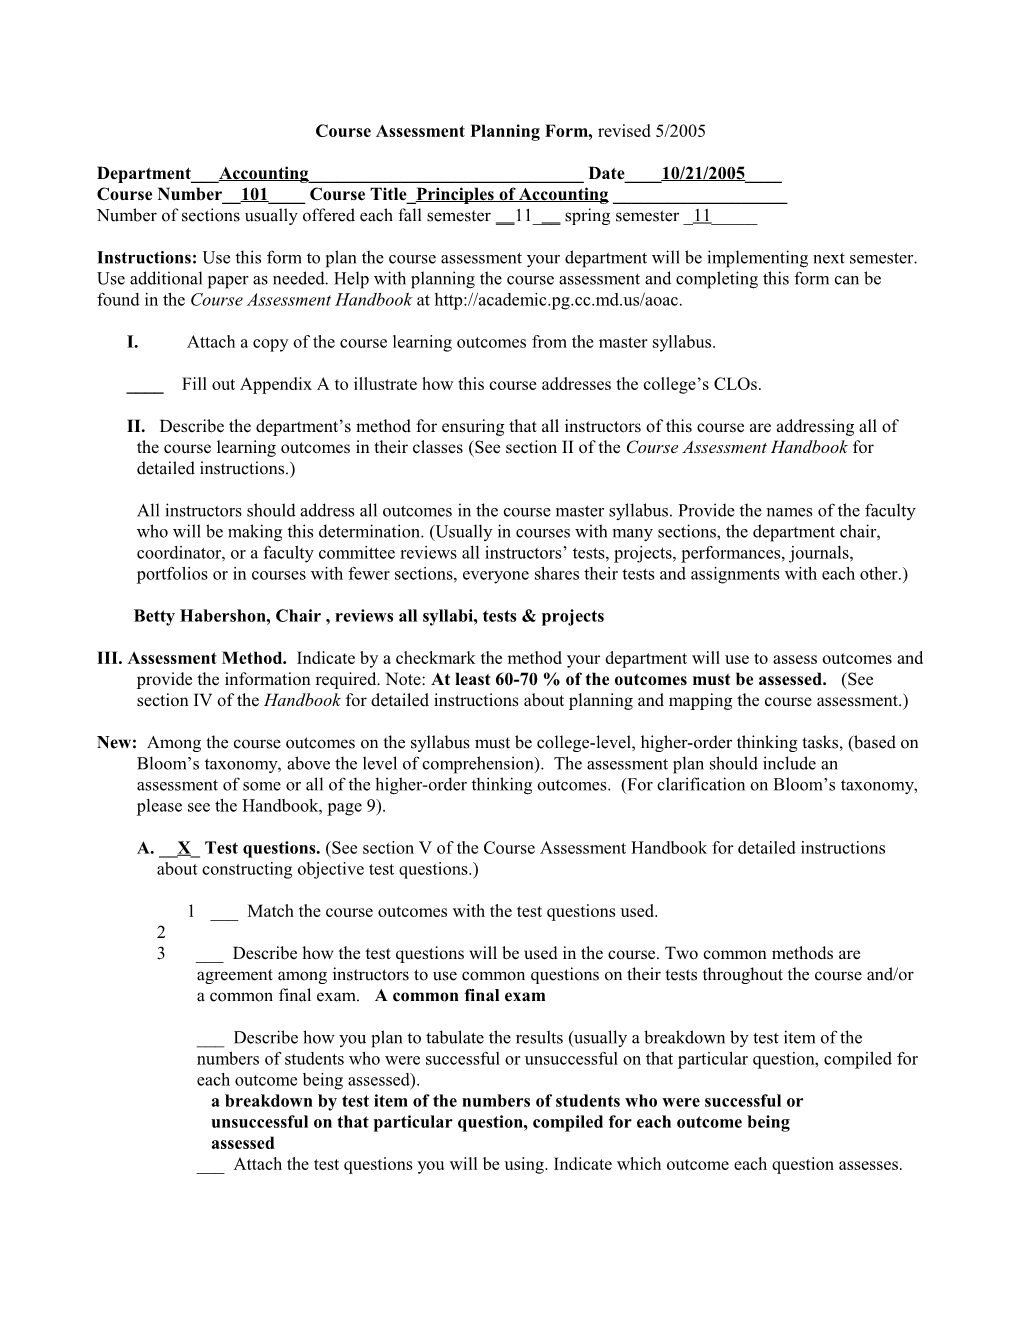 Course Assessment Planning Form, Revised Draft11/21/2002